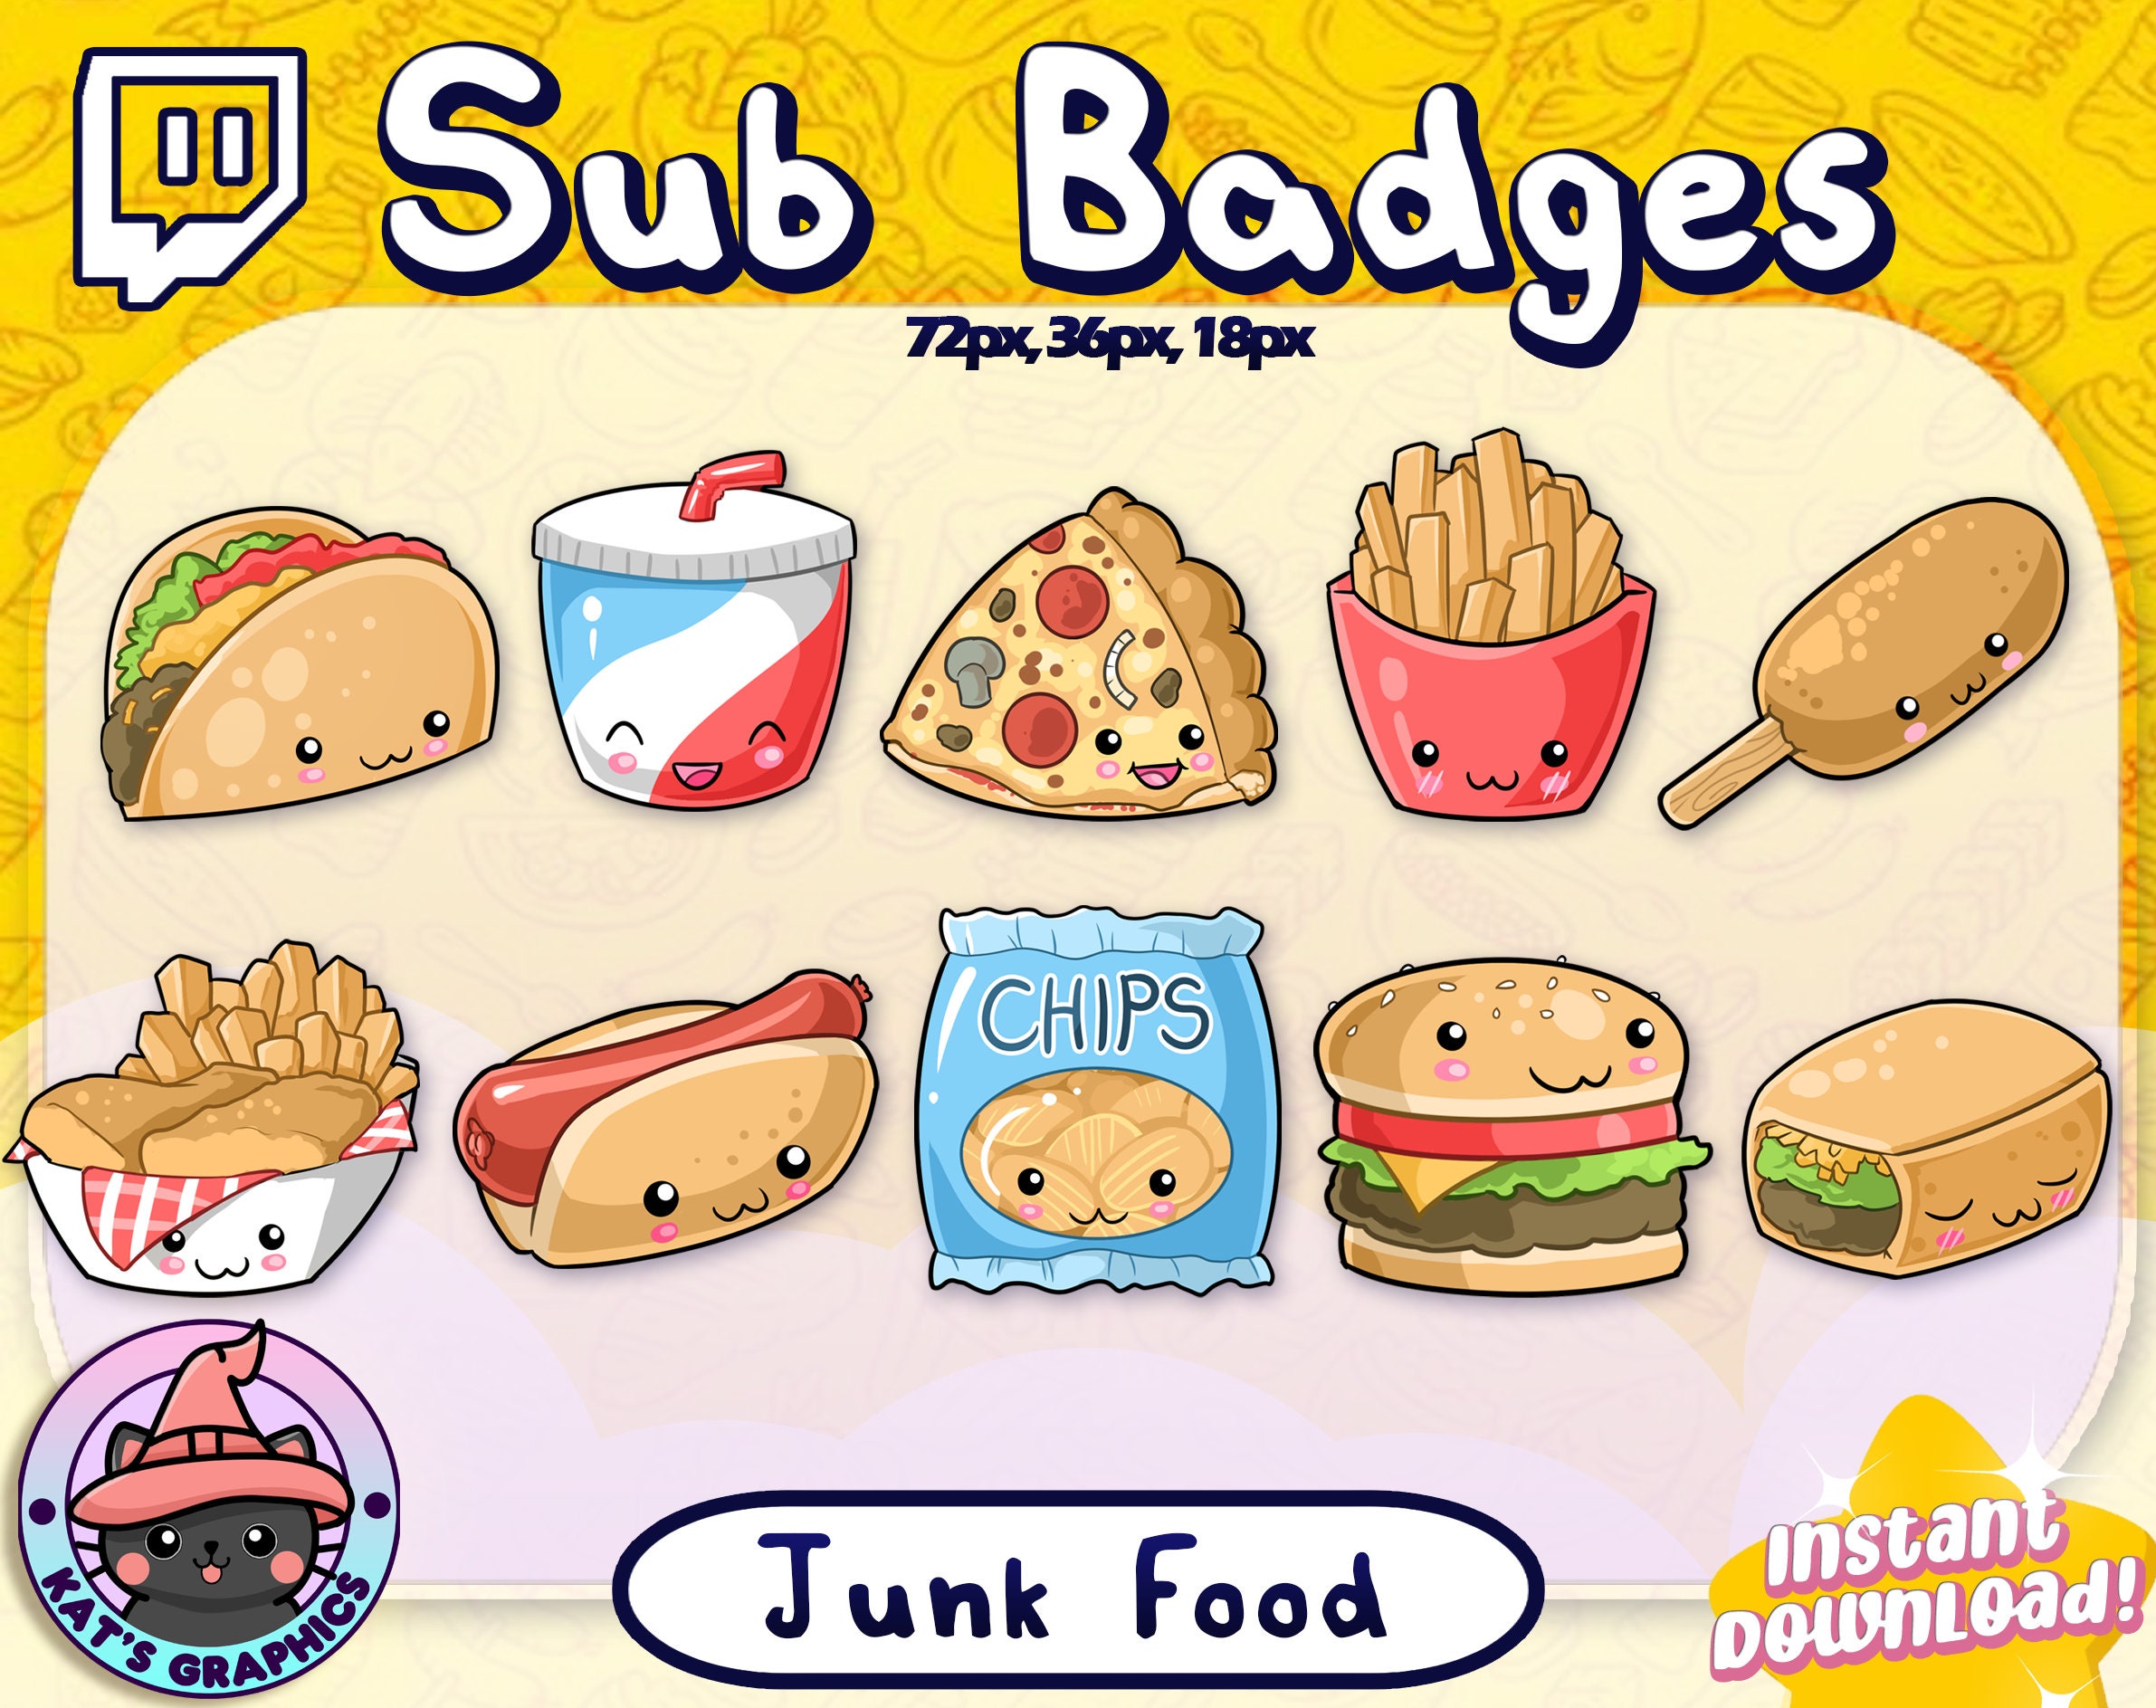 No Junk Food: Over 4,126 Royalty-Free Licensable Stock Illustrations &  Drawings | Shutterstock